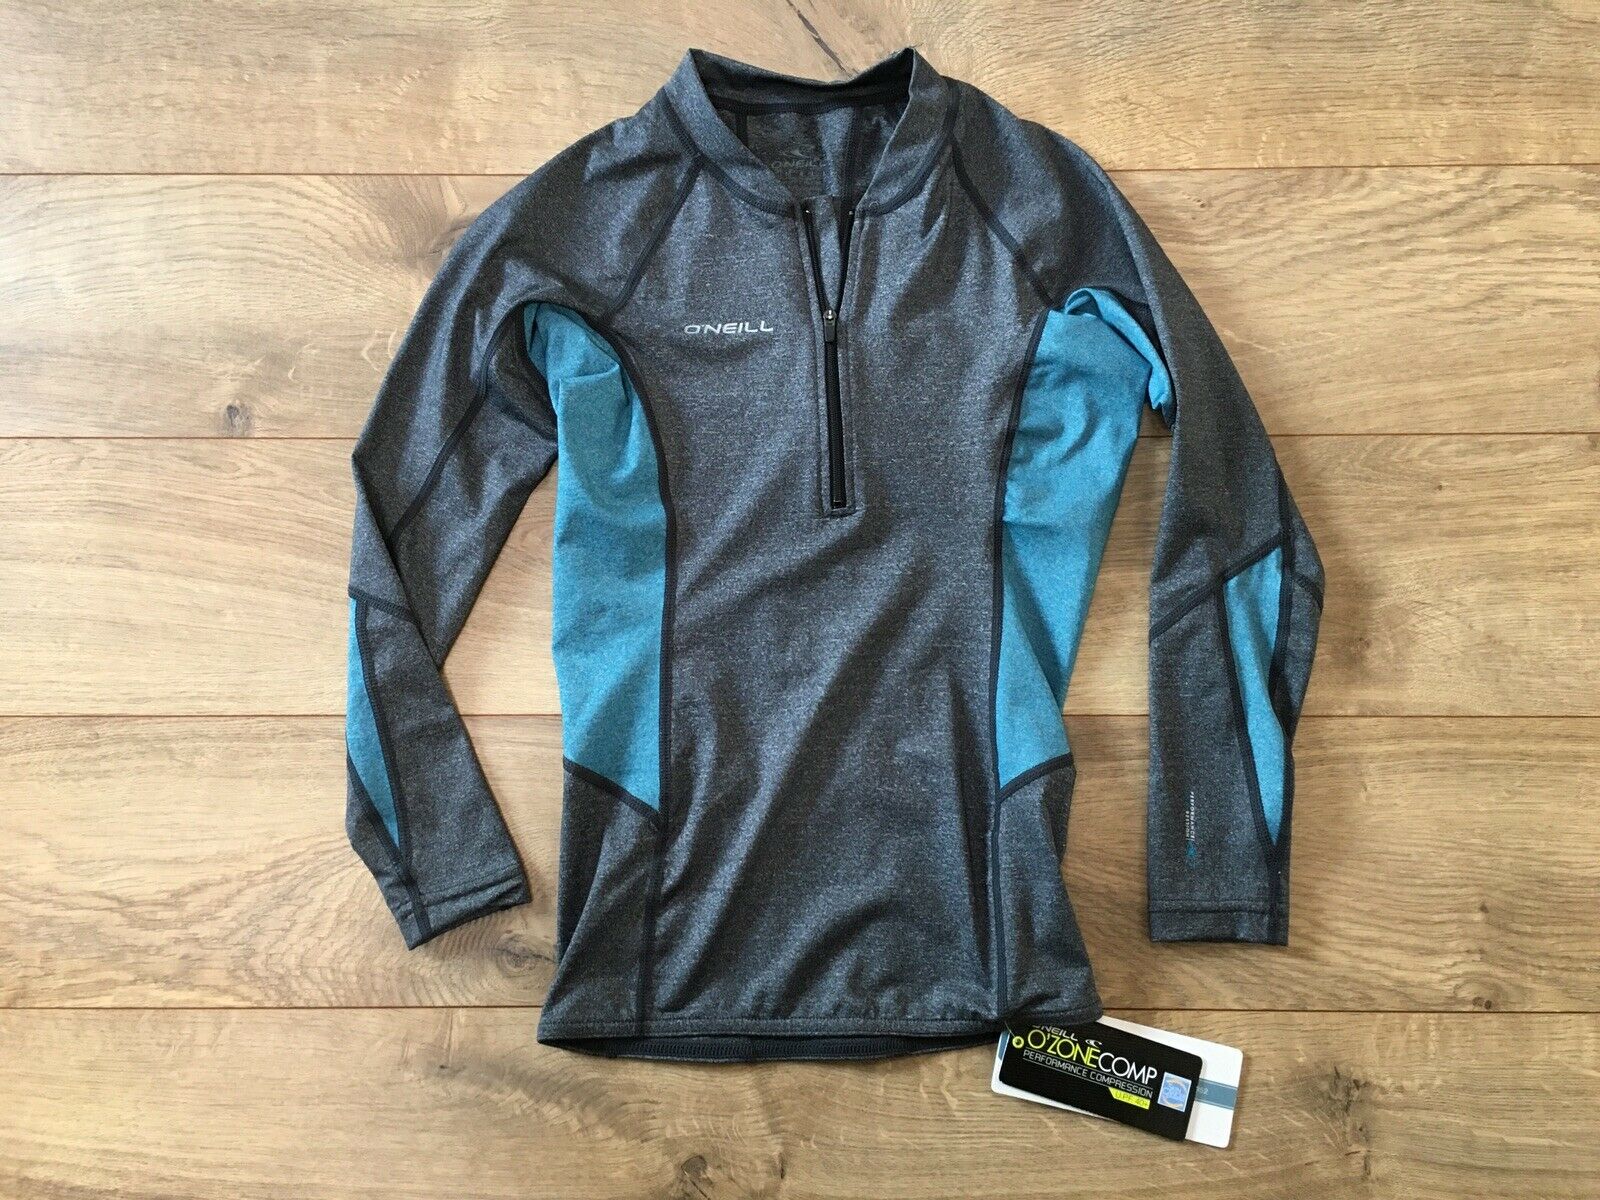 O'neill Ozone Compression Ls Long Sleeve Crew Zip Shirt Black Teal Womens 4707s